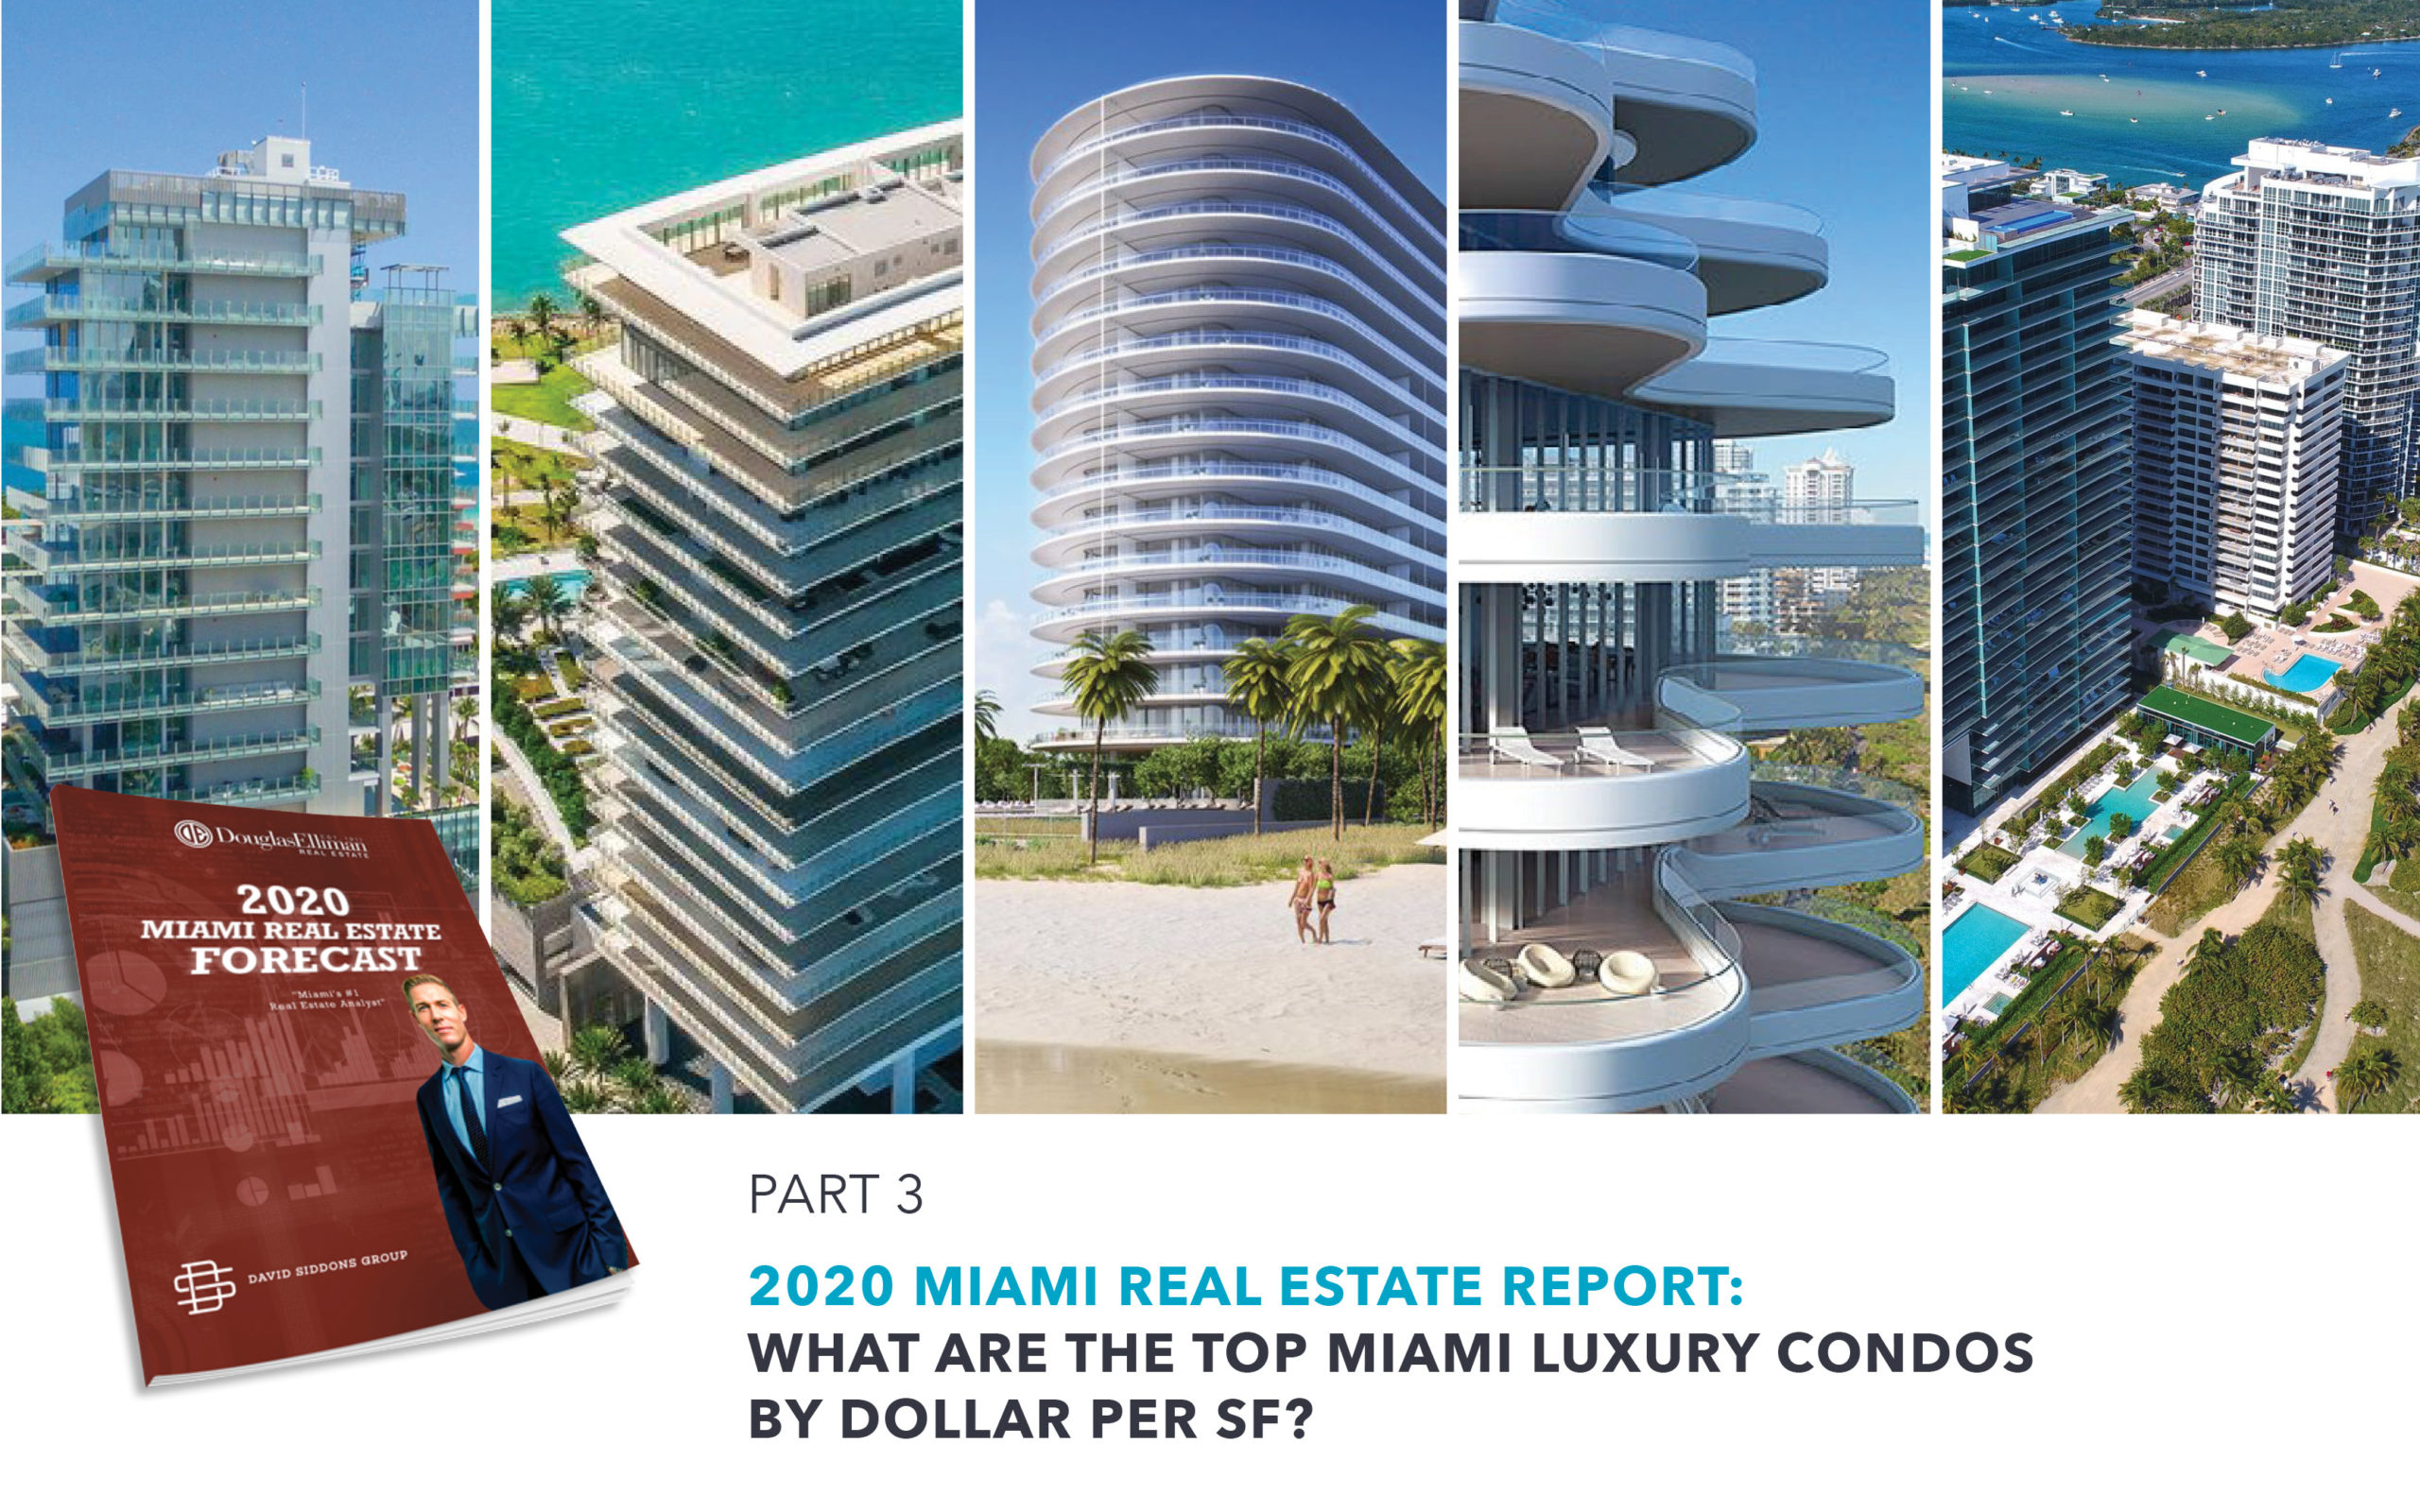 The Q1 2020 Miami Real Estate Report and Forecast